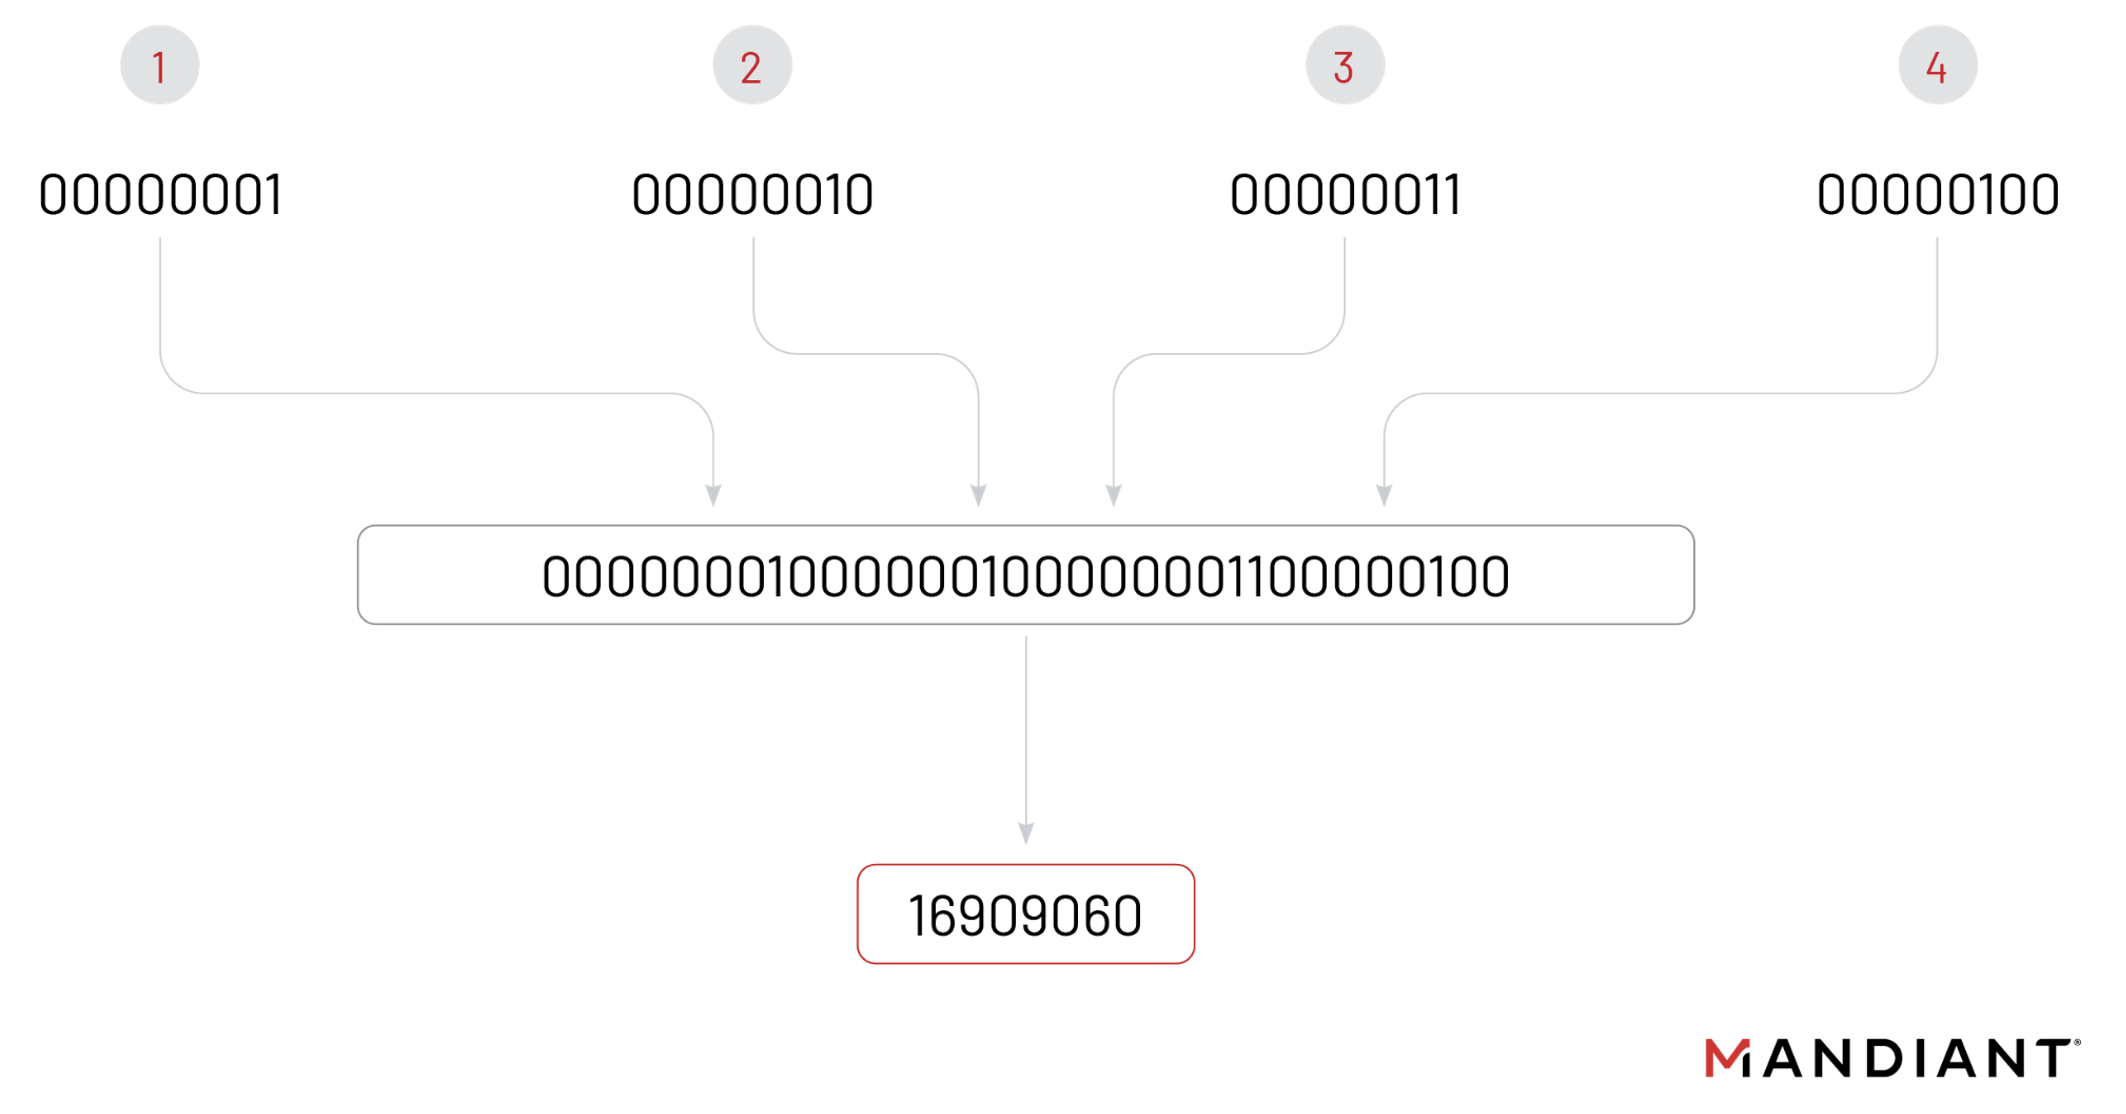 Showing how the IP 1.2.3.4 translates to a decimal representation